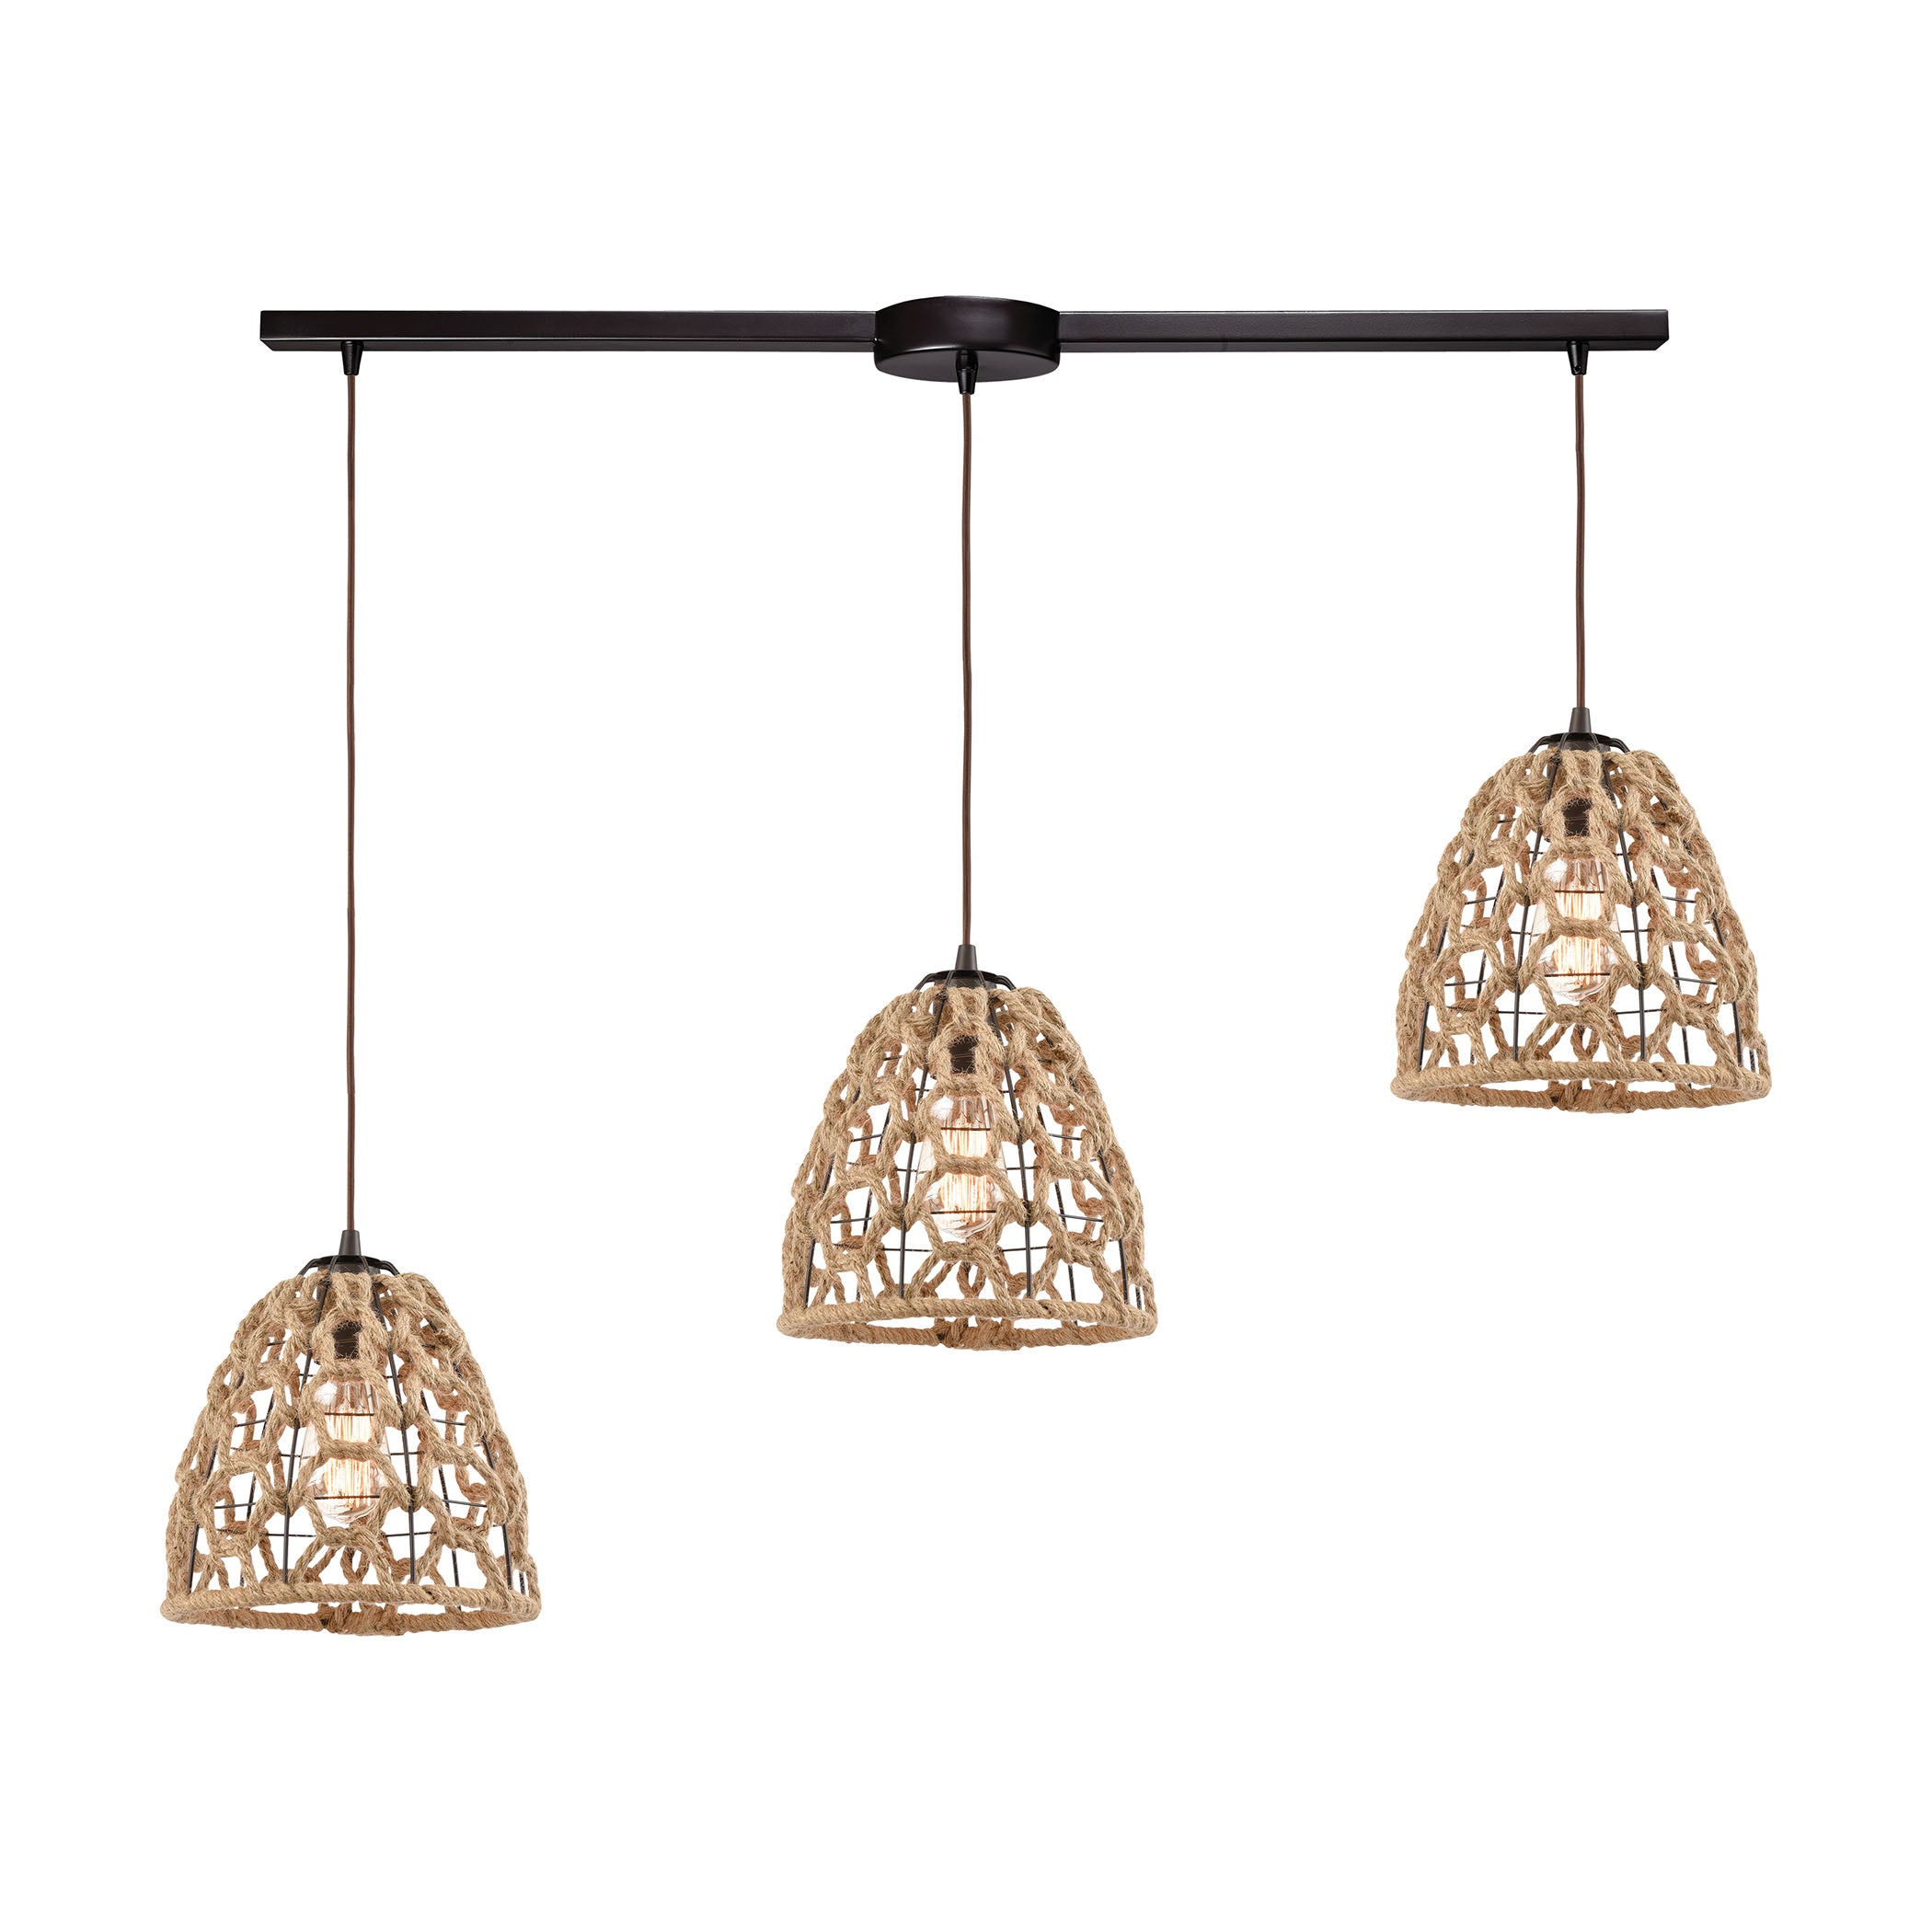 ELK Lighting 10709/3L Coastal Inlet 3-Light Linear Mini Pendant Fixture in Oil Rubbed Bronze with Rope